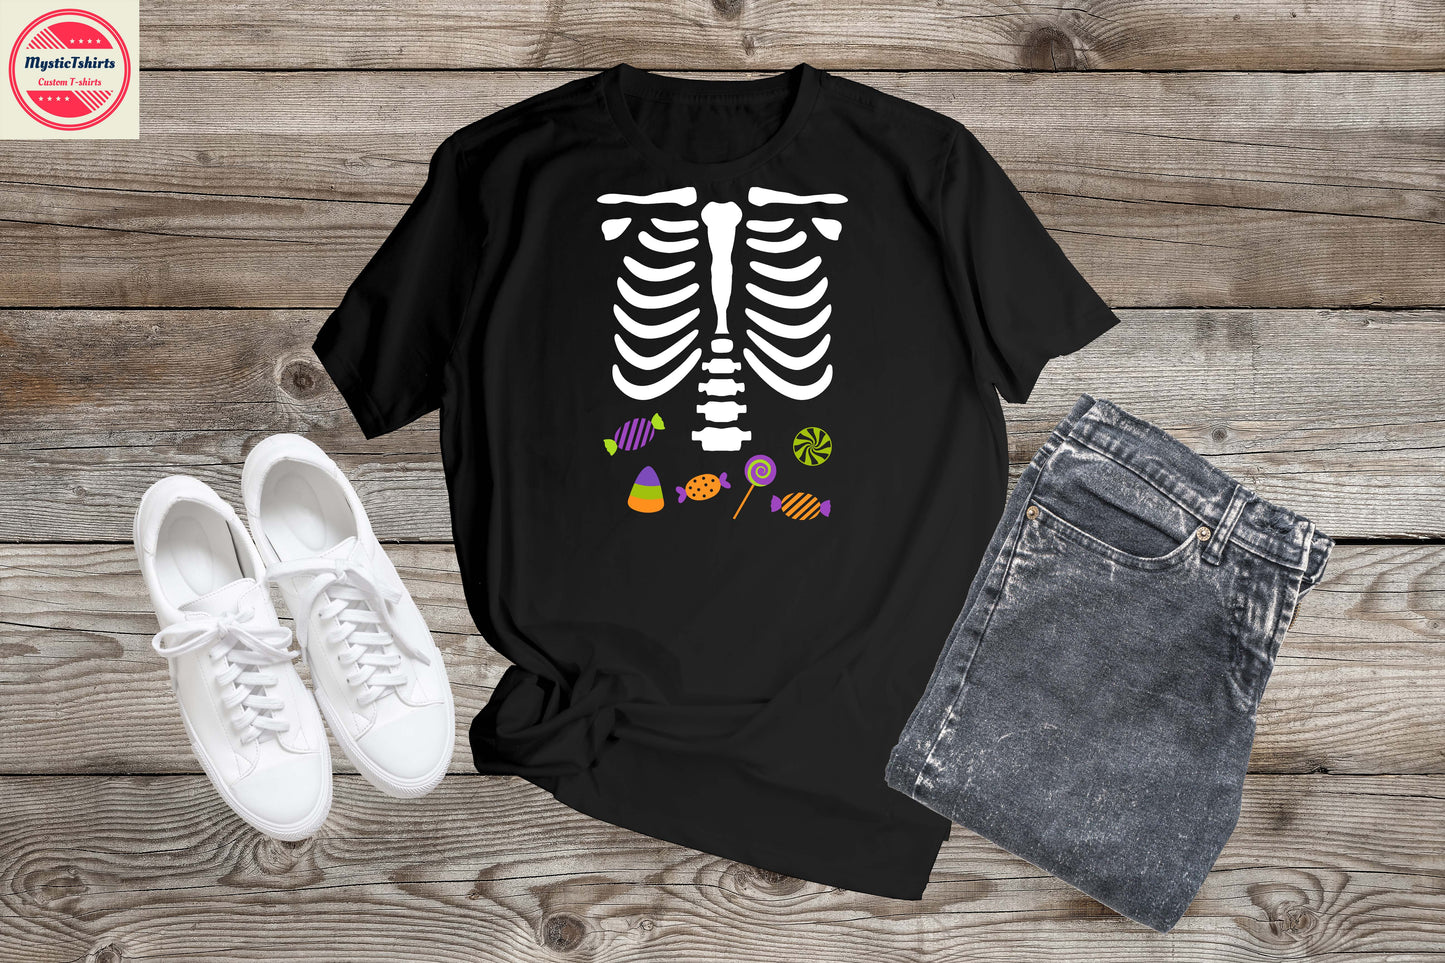 179. HALLOWEEN CANDY, Custom Made Shirt, Personalized T-Shirt, Custom Text, Make Your Own Shirt, Custom Tee